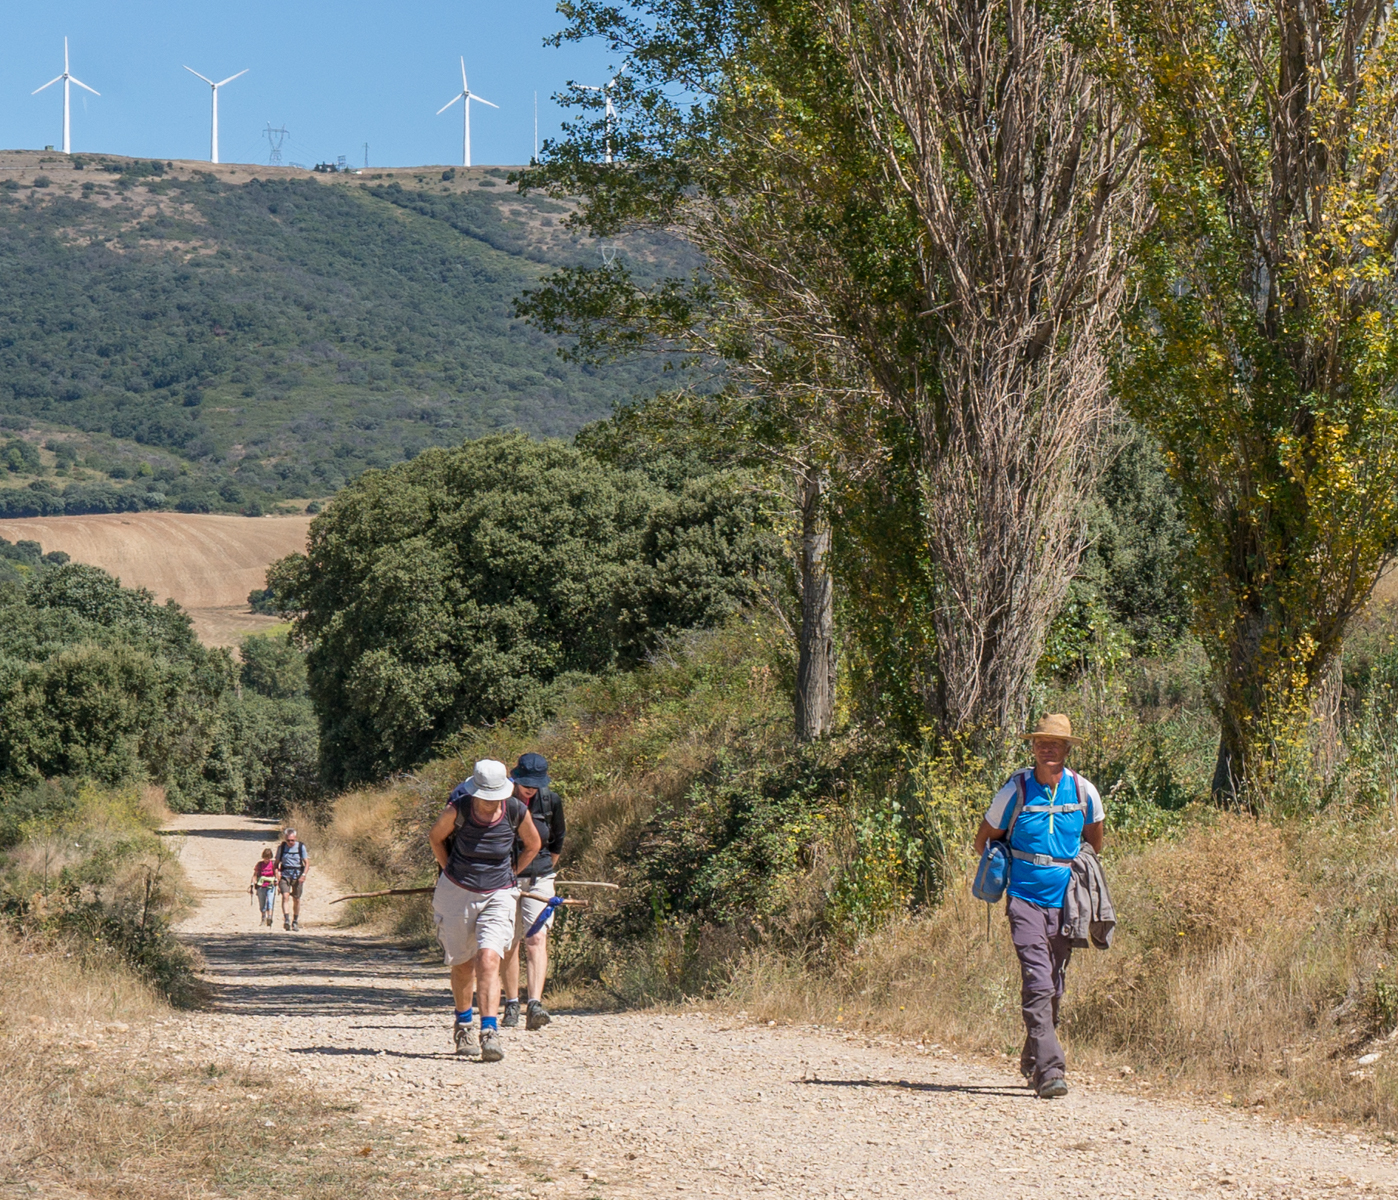 Camino Francés pilgrims viewed from approximately 1.5 km east of Uterga, Spain | Photo by Mike Hudak